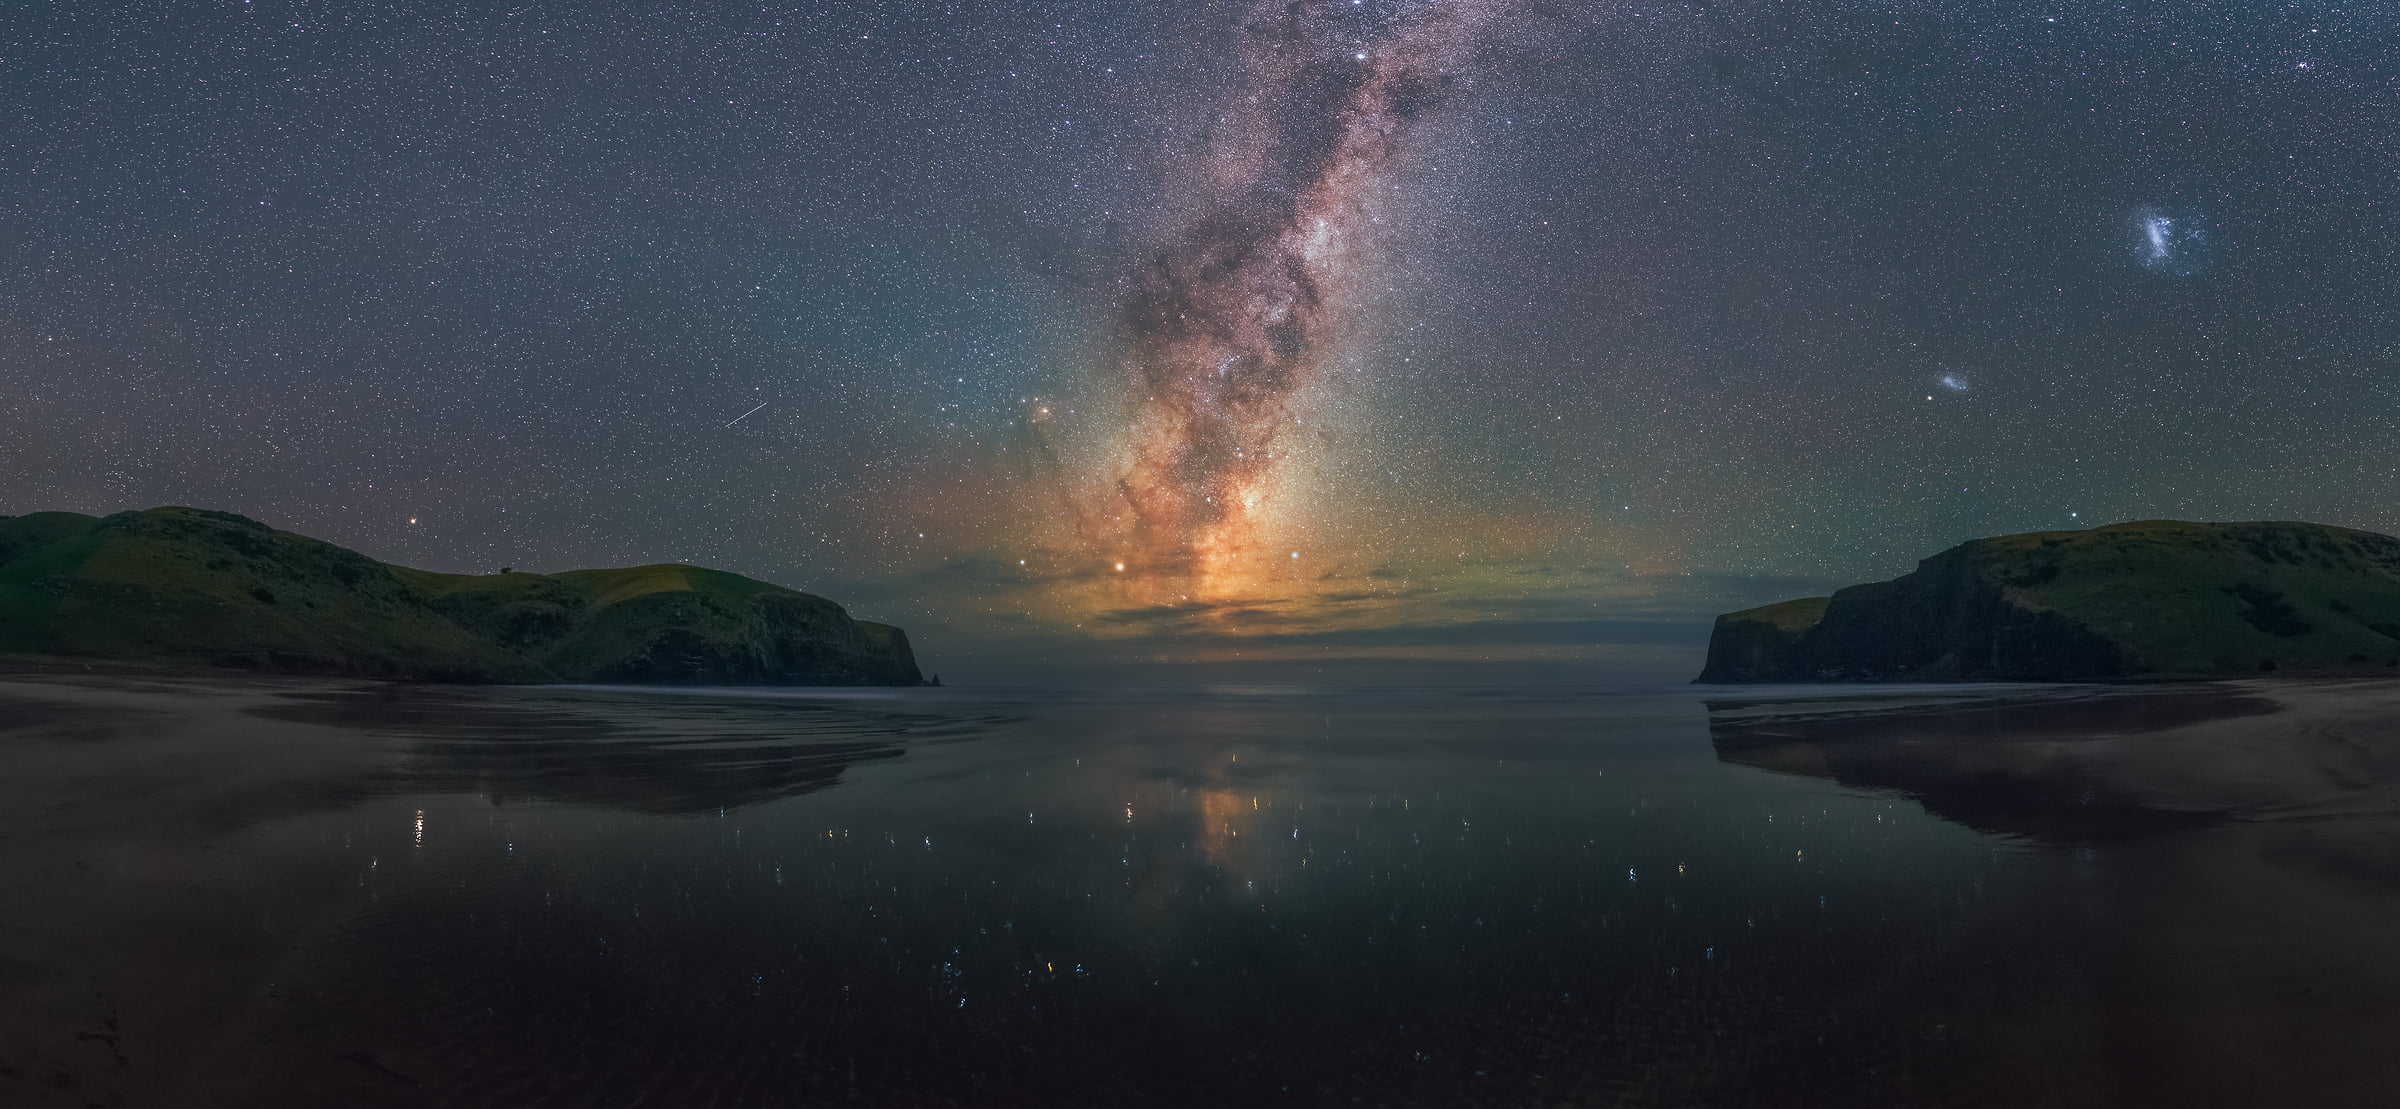 113 megapixels! A very high resolution, large-format VAST photo of the Milky Way, stars, and night sky over a beach; fine art landscape astrophotograph created by astrophotographer Paul Wilson in Eastern Bays, Banks Peninsula, New Zealand